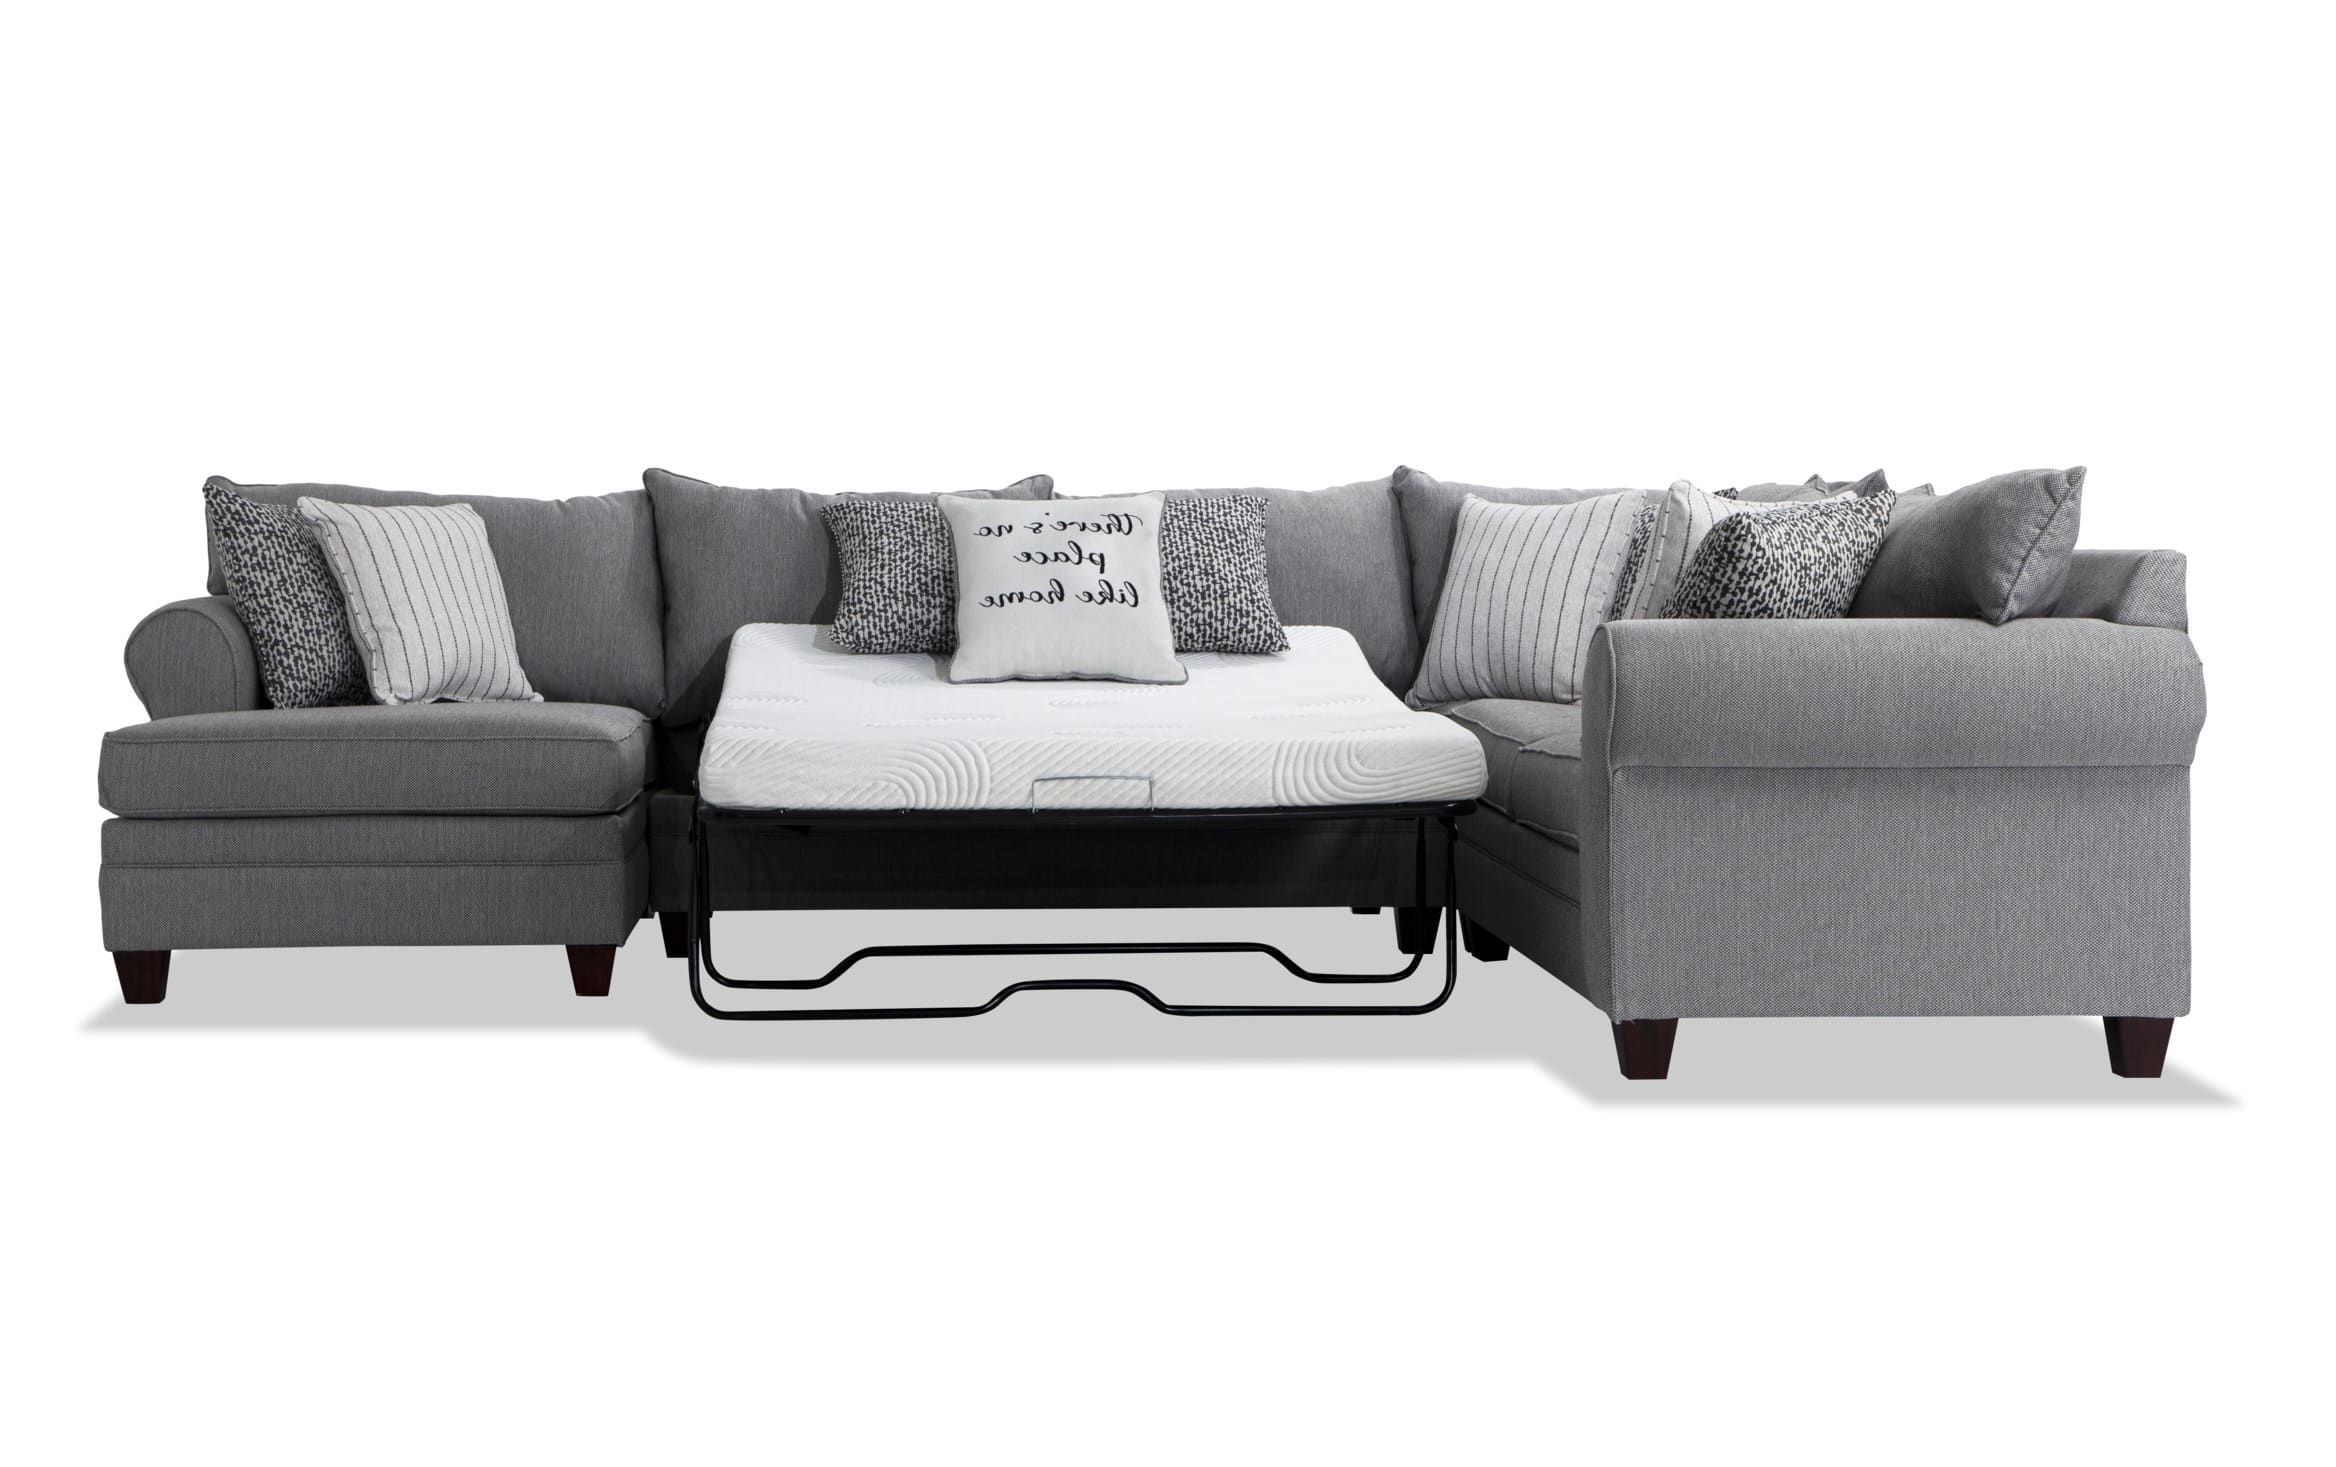 Laurel Gray 4 Piece Bob O Pedic Left Arm Facing Sleeper Sectional Pertaining To Preferred Left Or Right Facing Sleeper Sectionals (View 7 of 15)